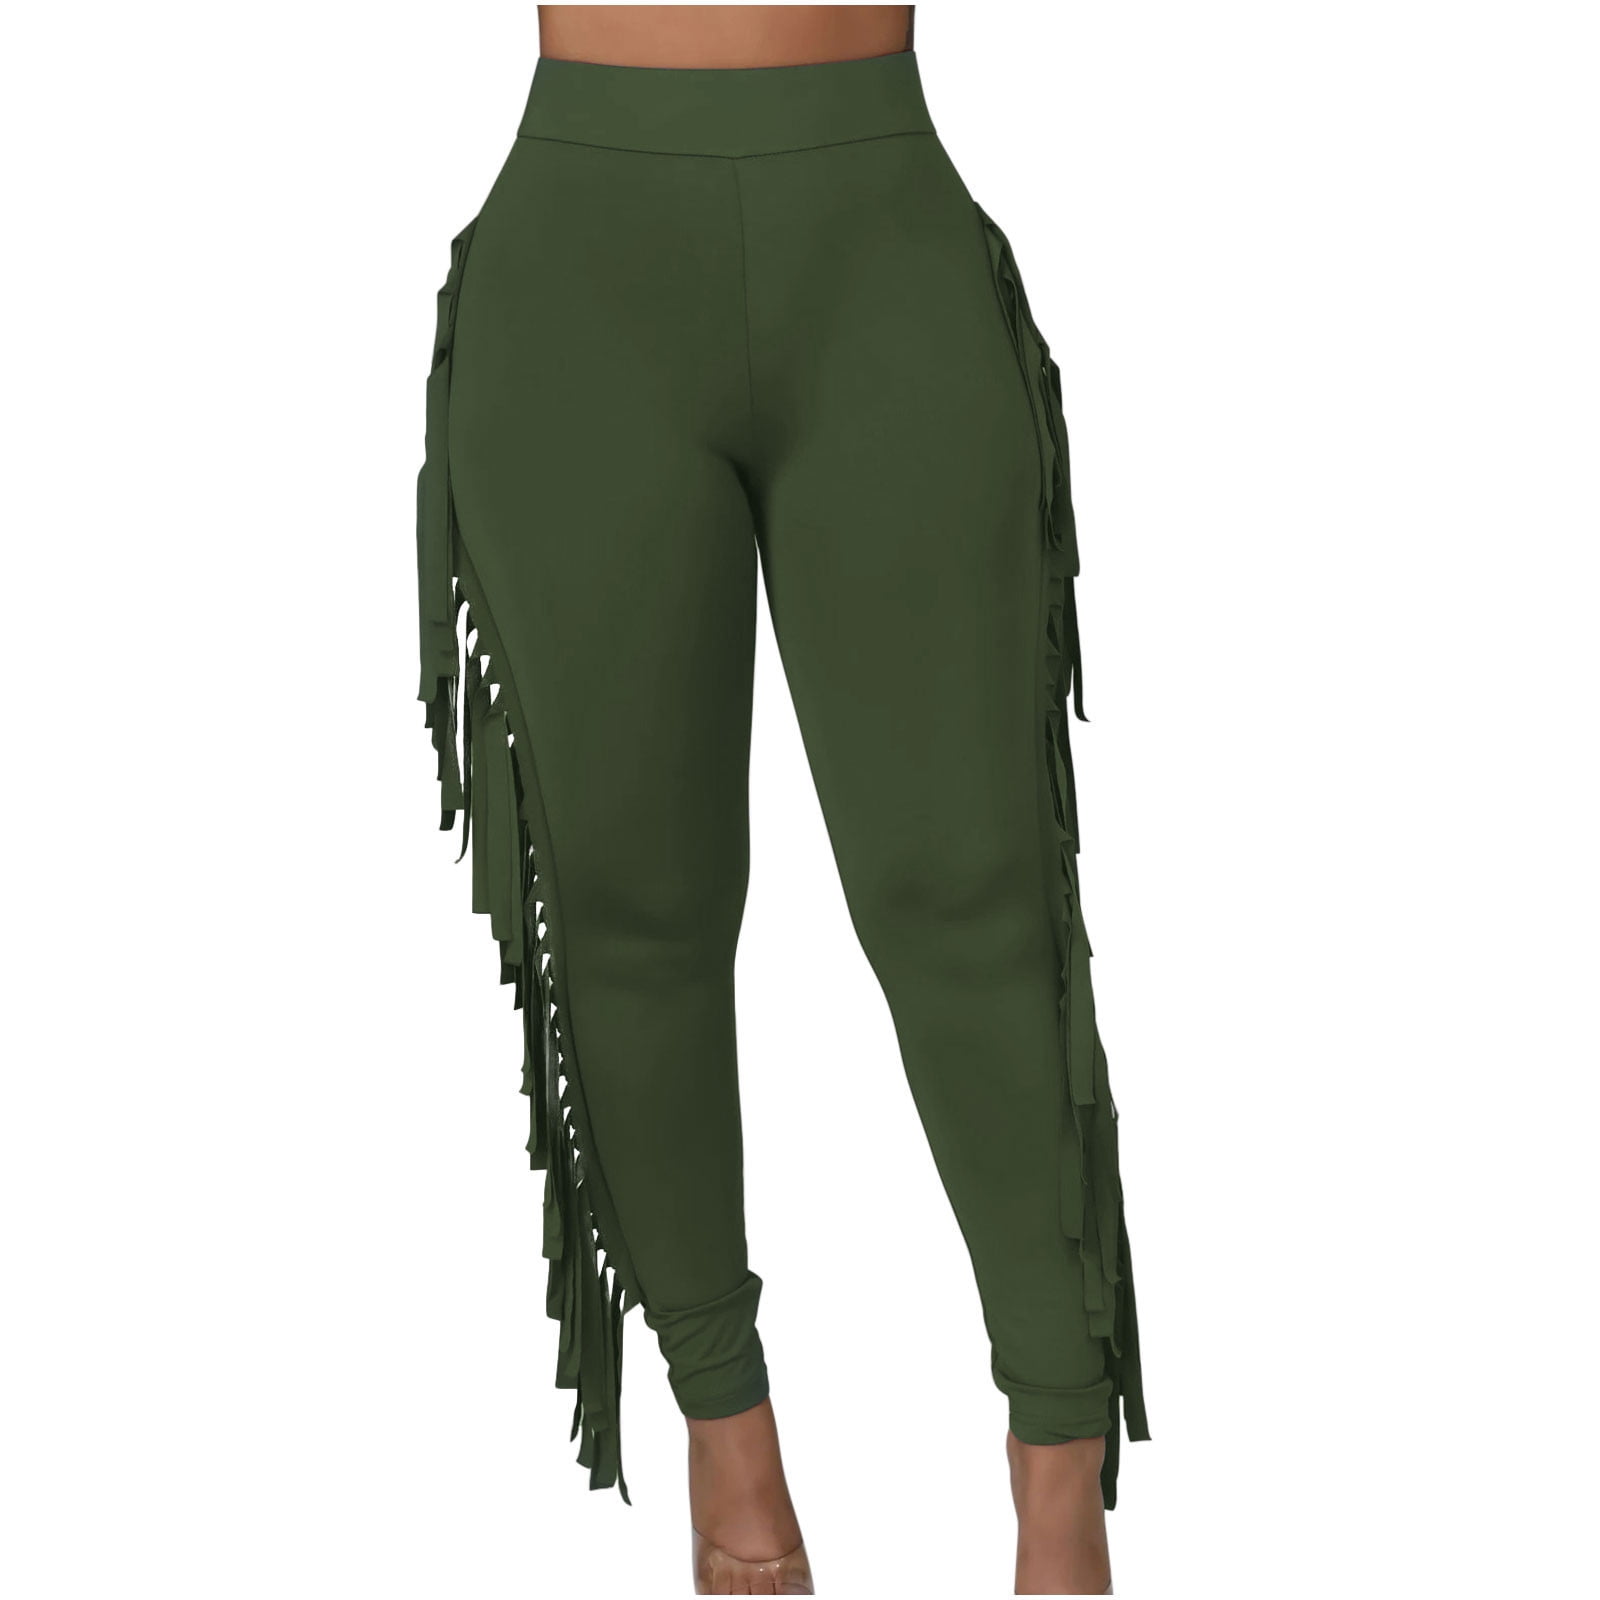 Shop Wine Regular Fit Pants by ATTIC SALT at House of Designers  HOUSE OF  DESIGNERS